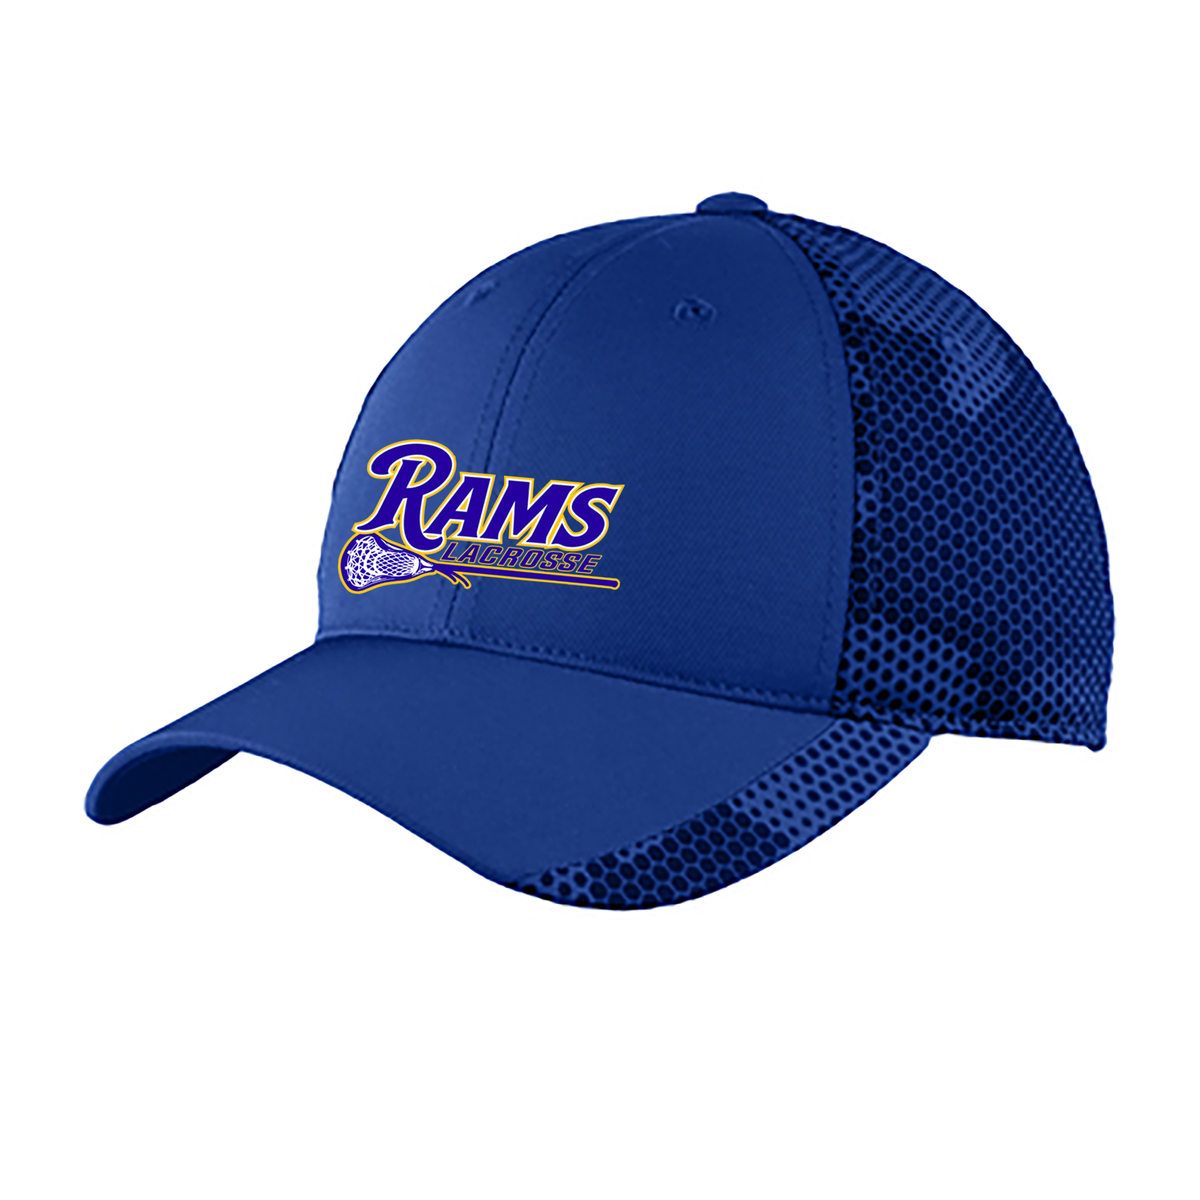 Southeastern Youth Lacrosse CamoHex Cap